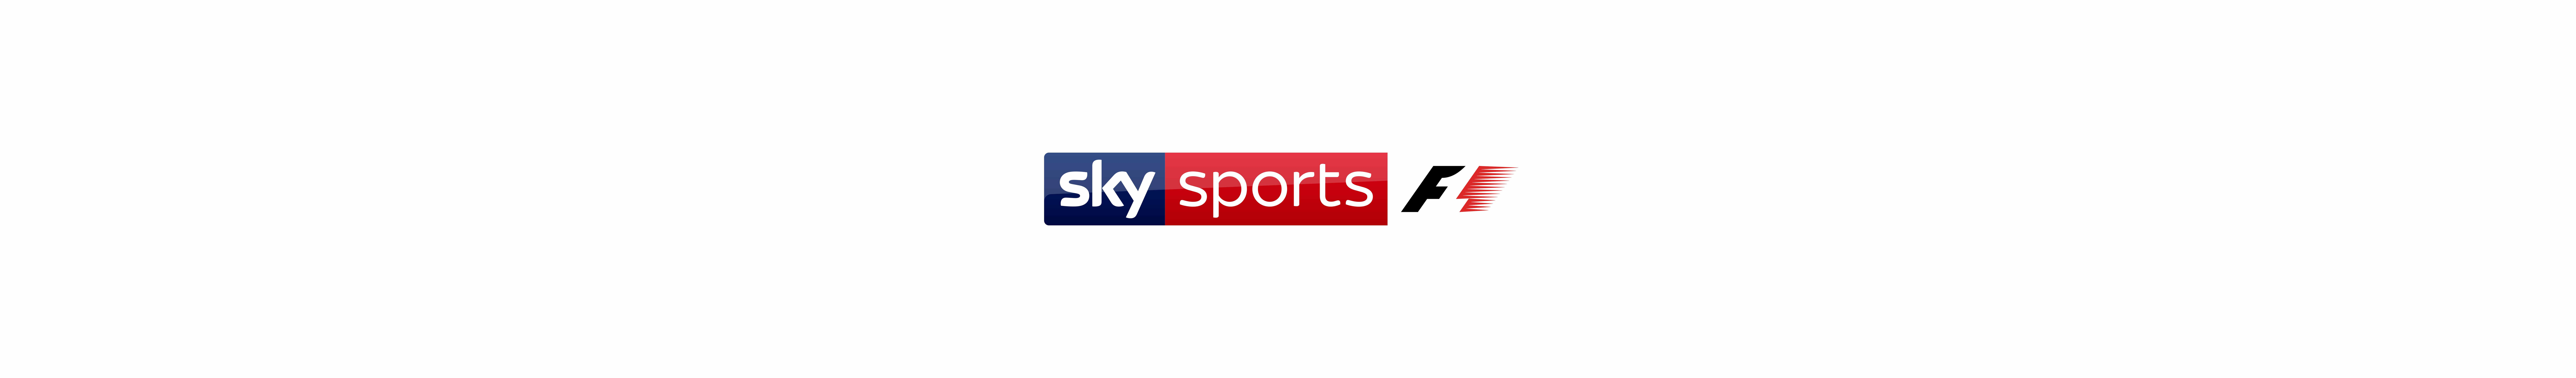 The packs reflect the new Sky Sports branding and programming line-up.